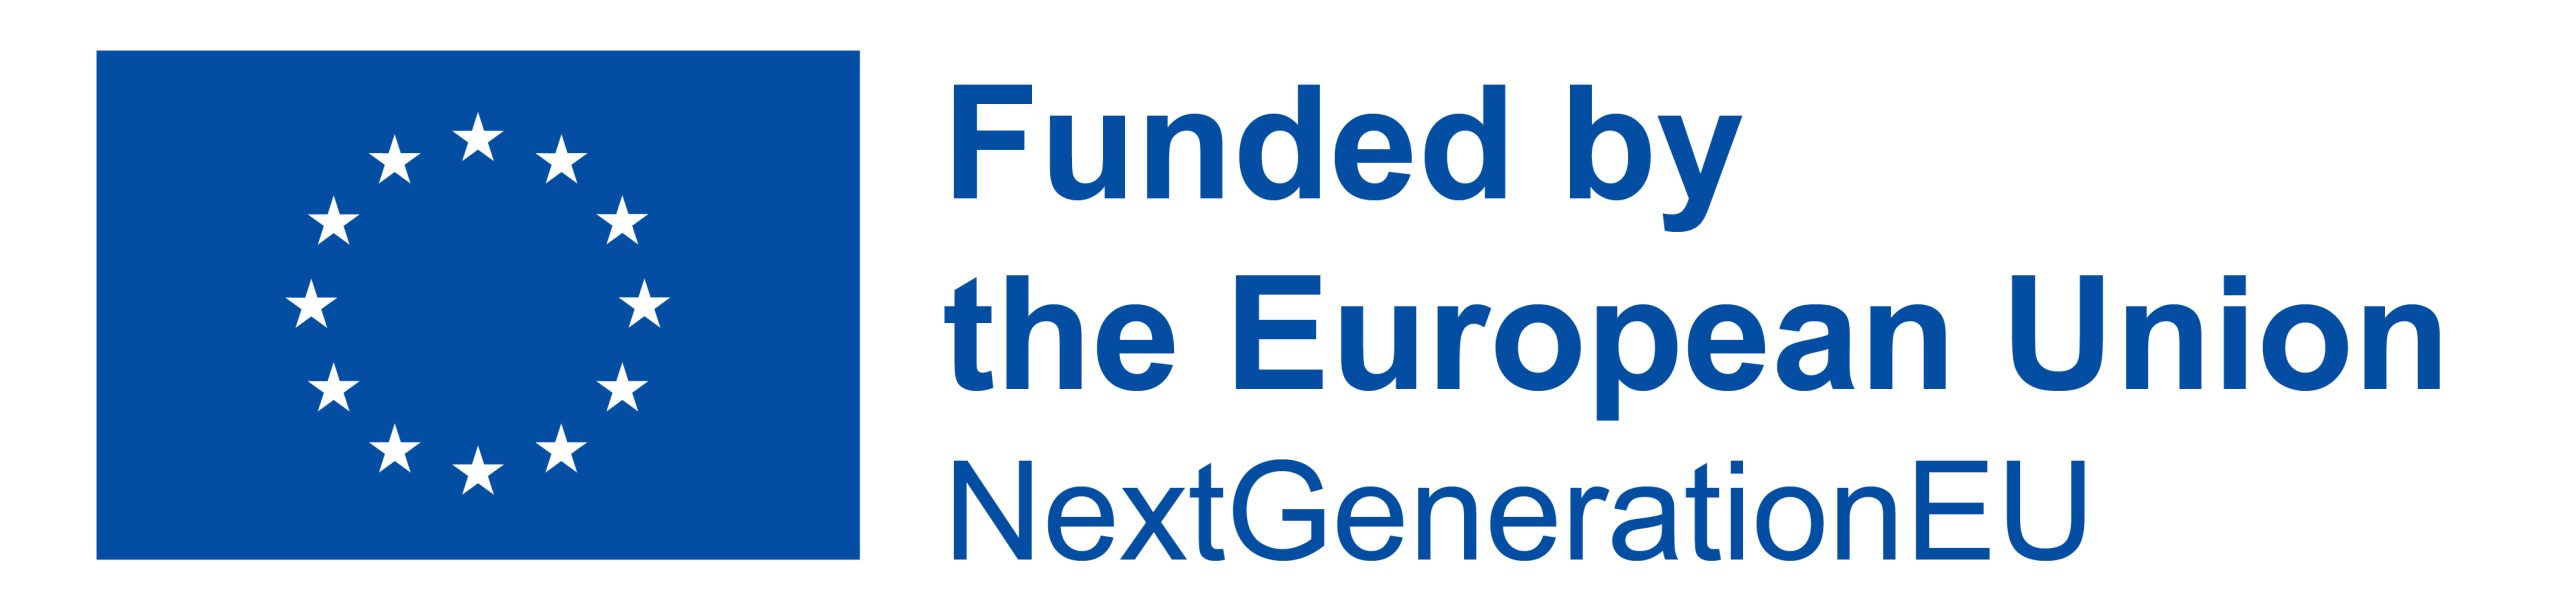 Funded by the European Union - Next Generation